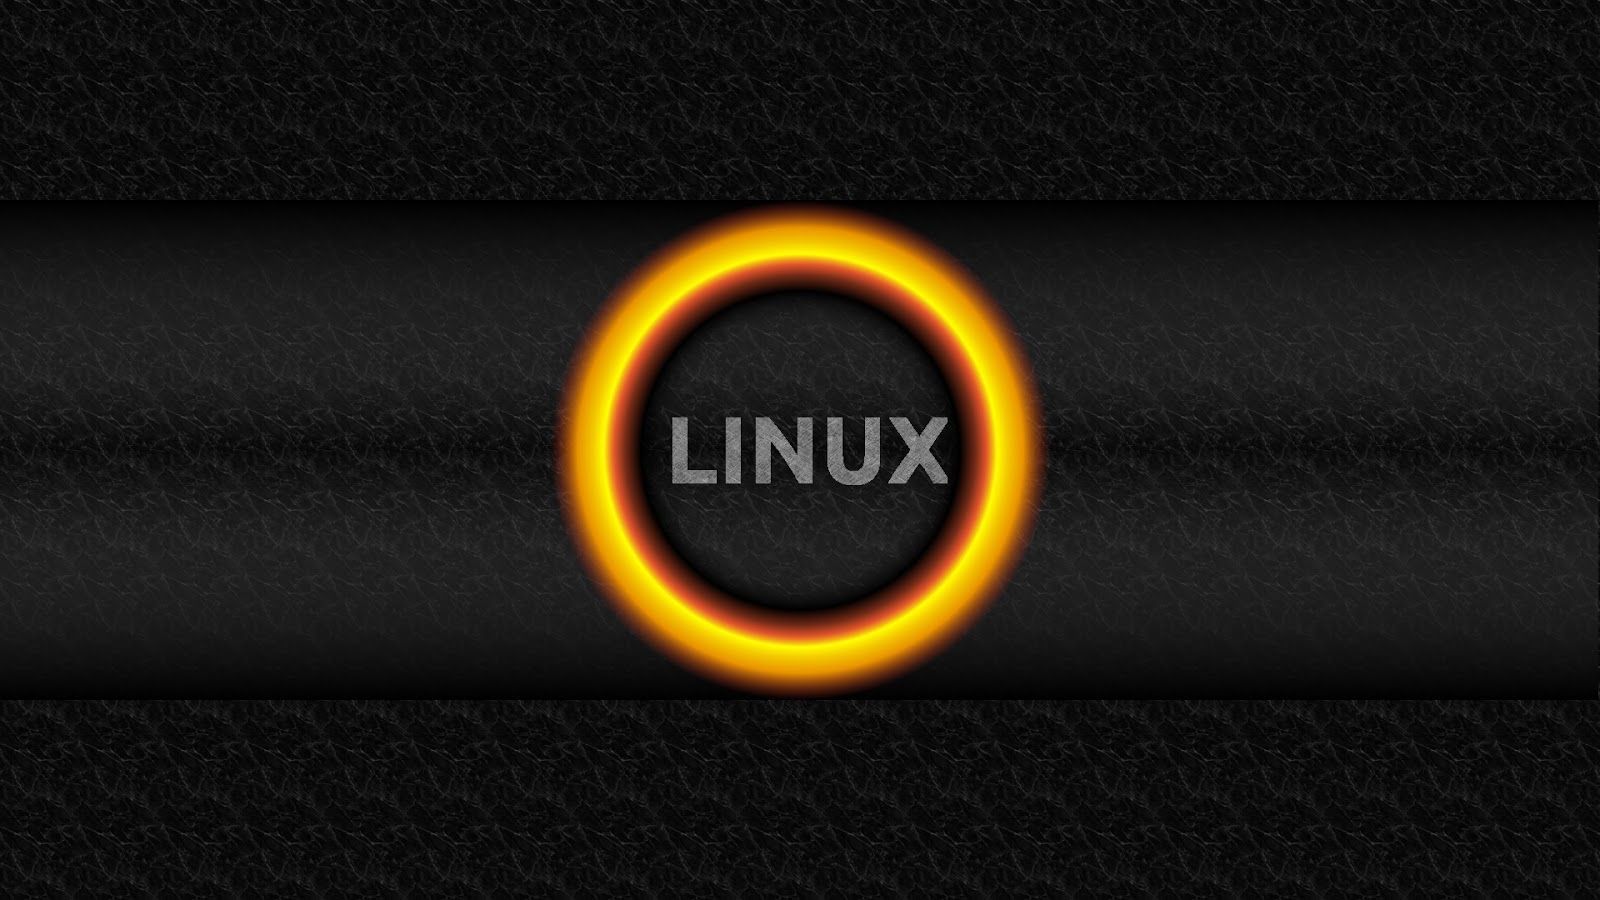 20 Linux wallpapers HD  Download Free backgrounds